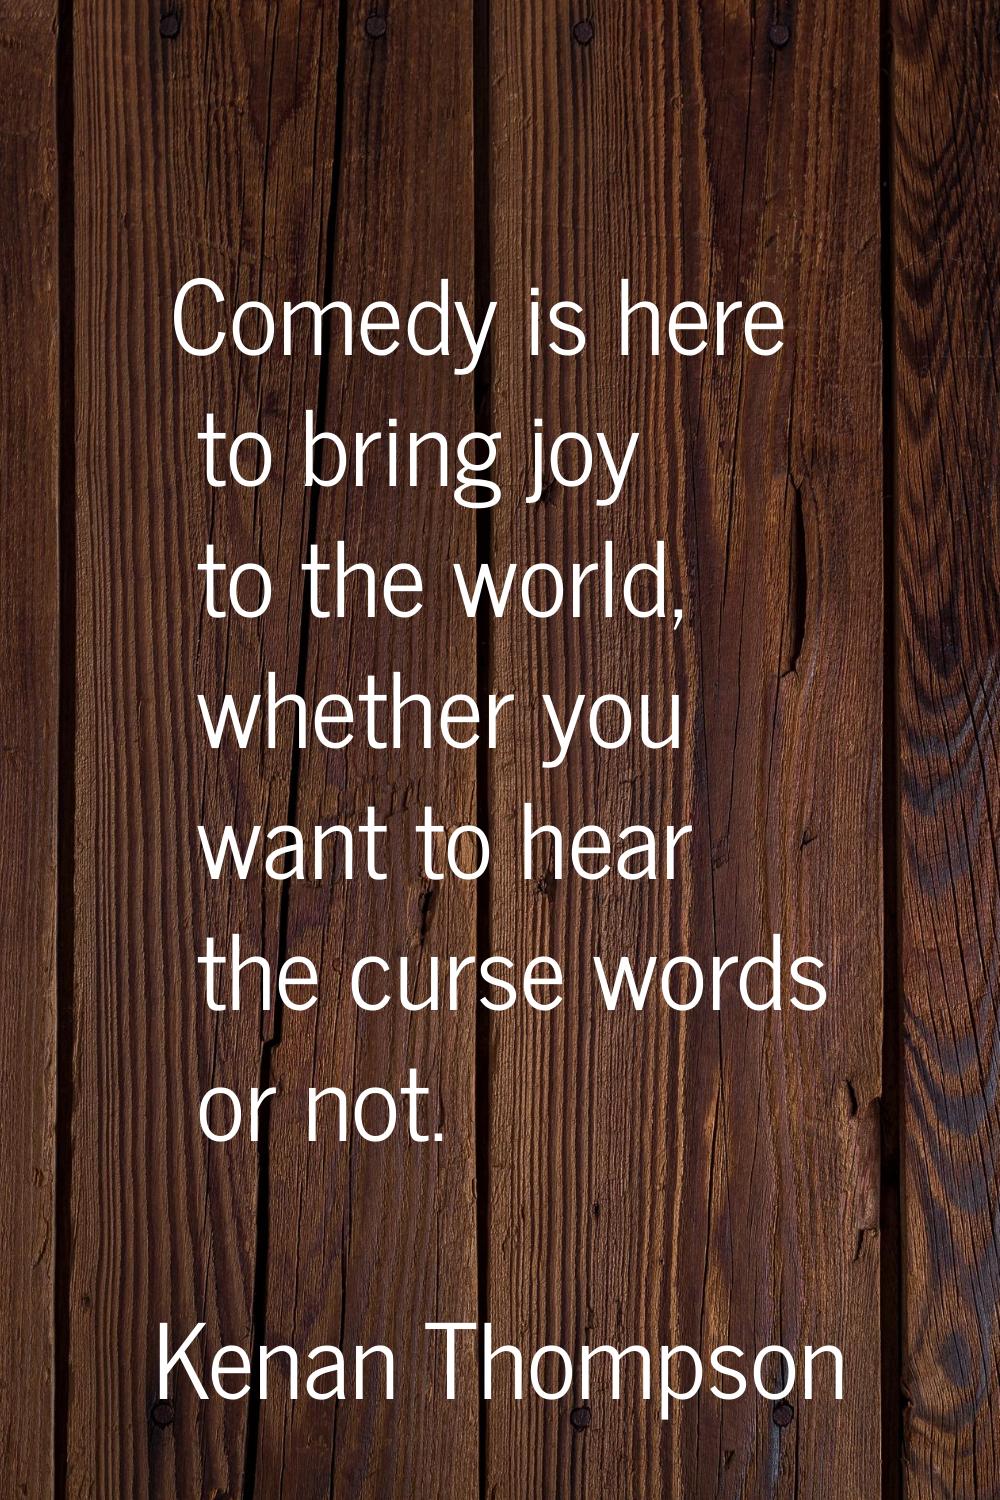 Comedy is here to bring joy to the world, whether you want to hear the curse words or not.